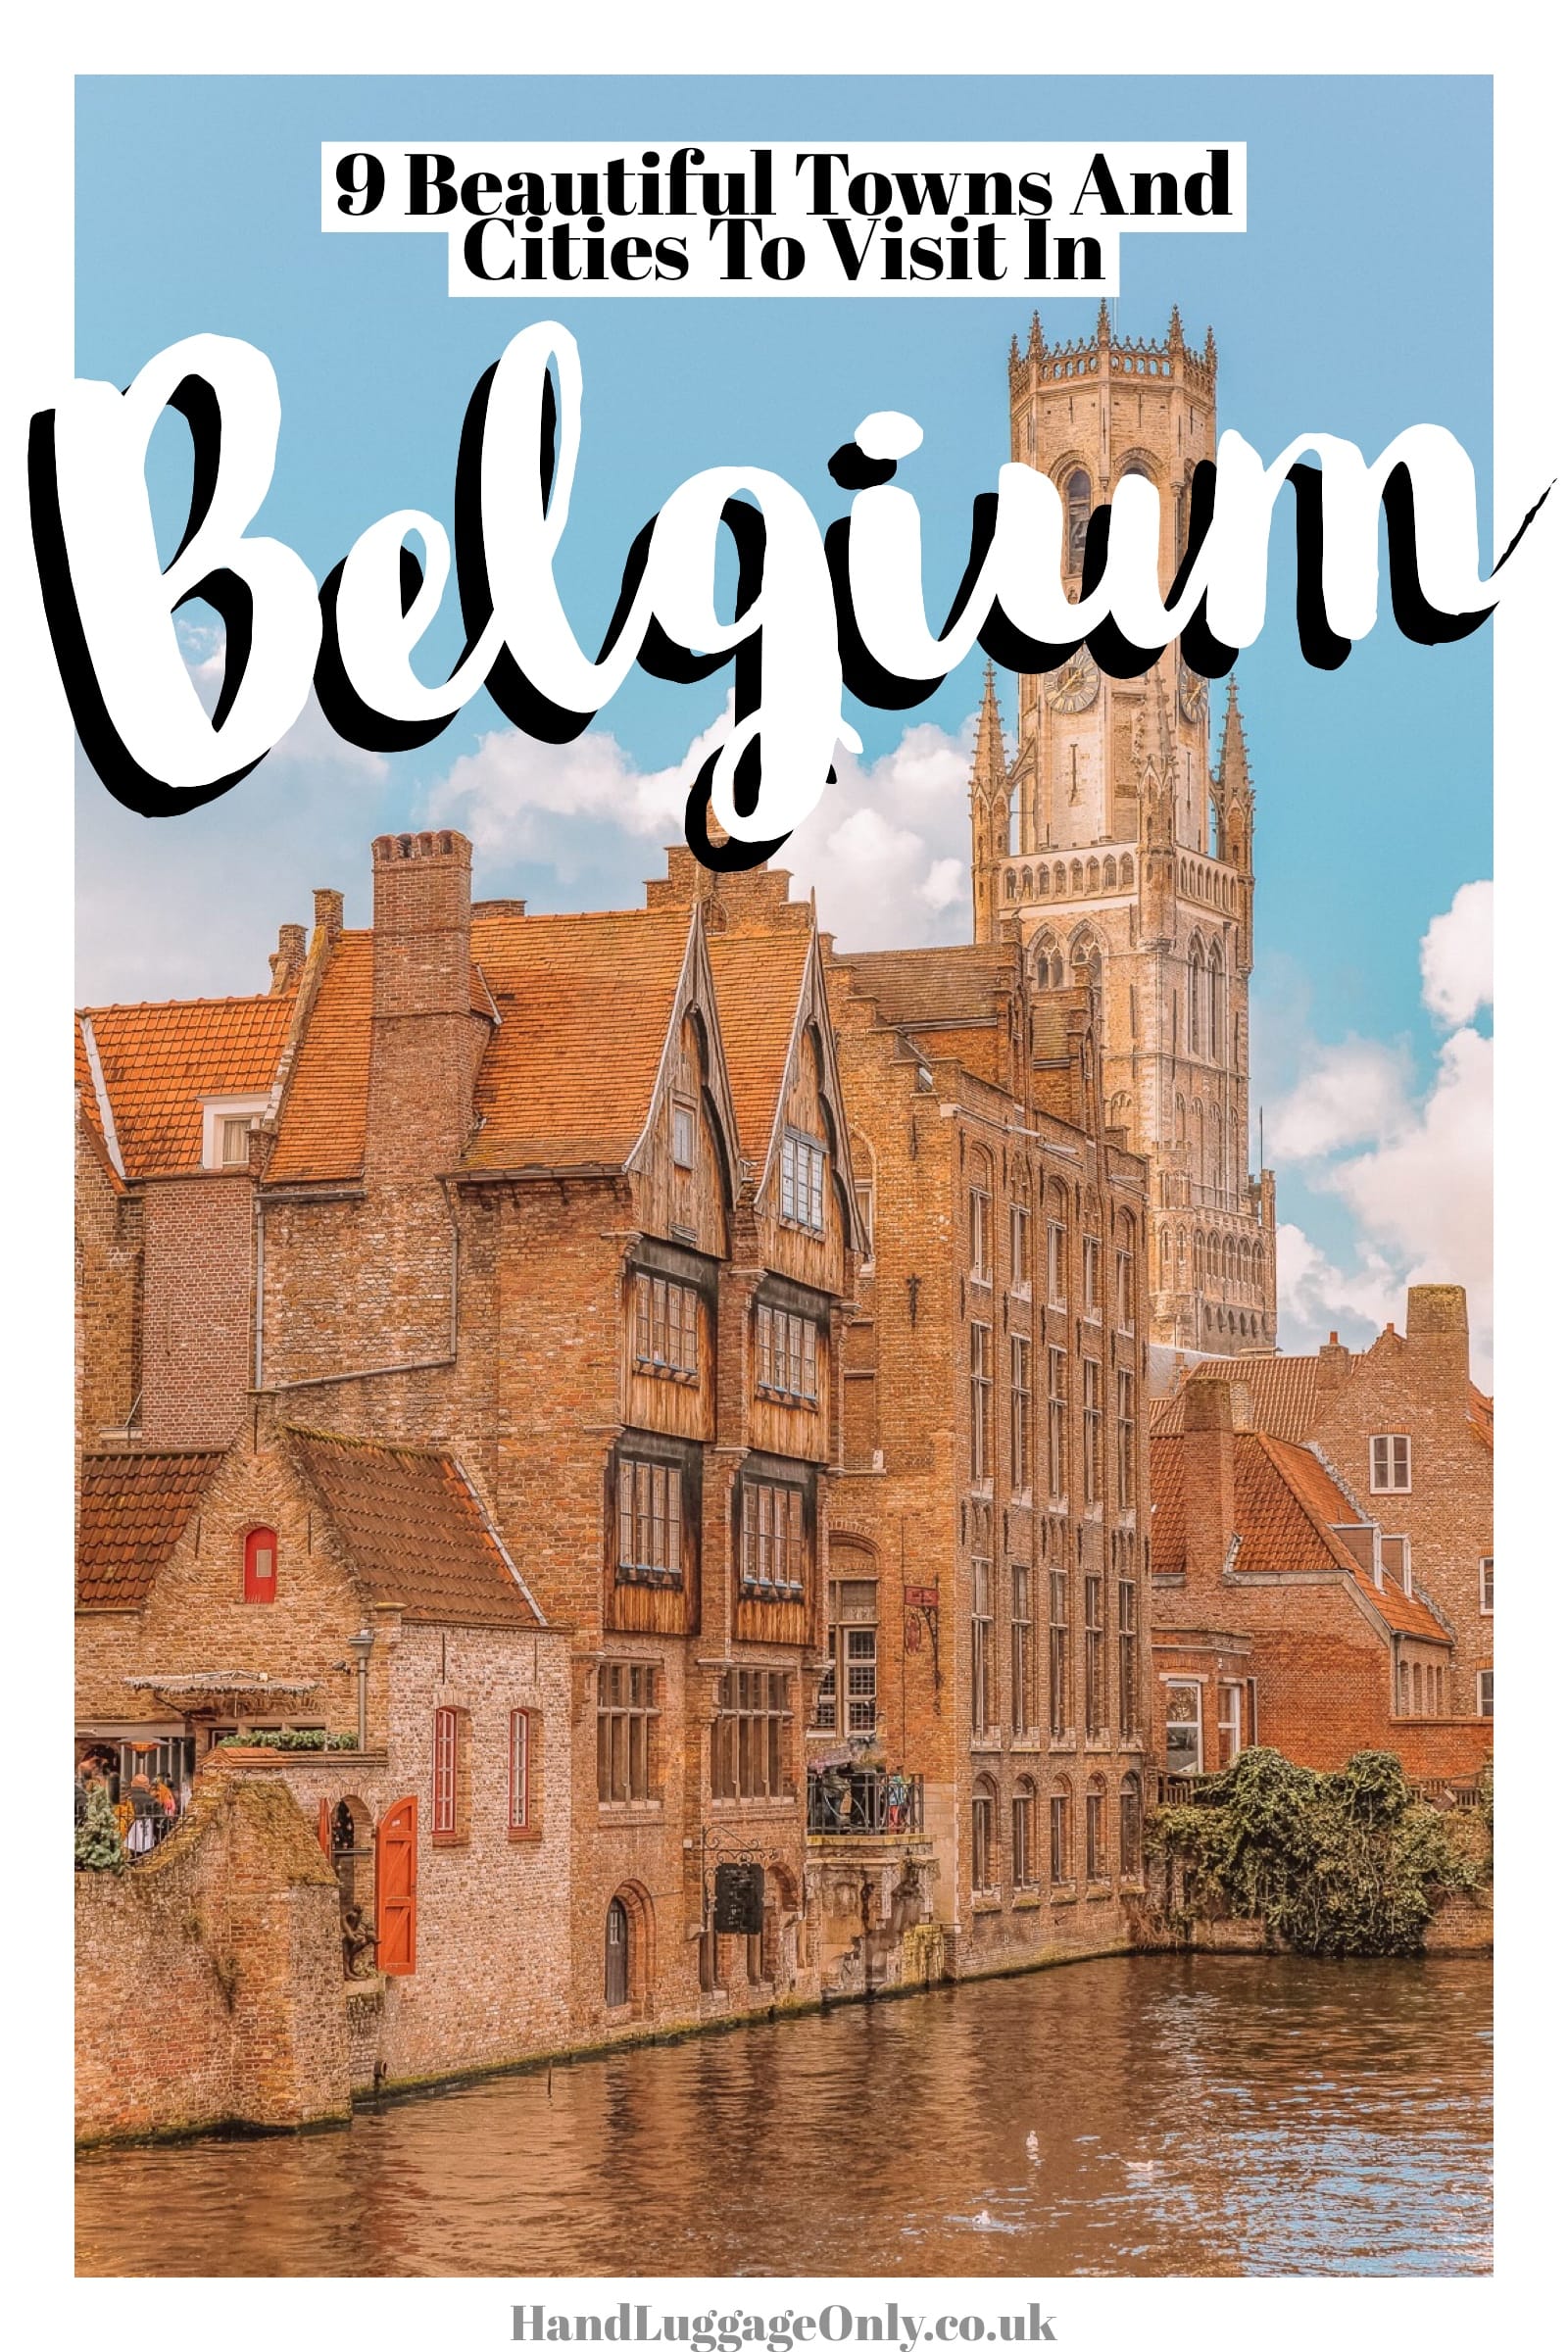 9 Gorgeous Town And Cities In Belgium To Visit